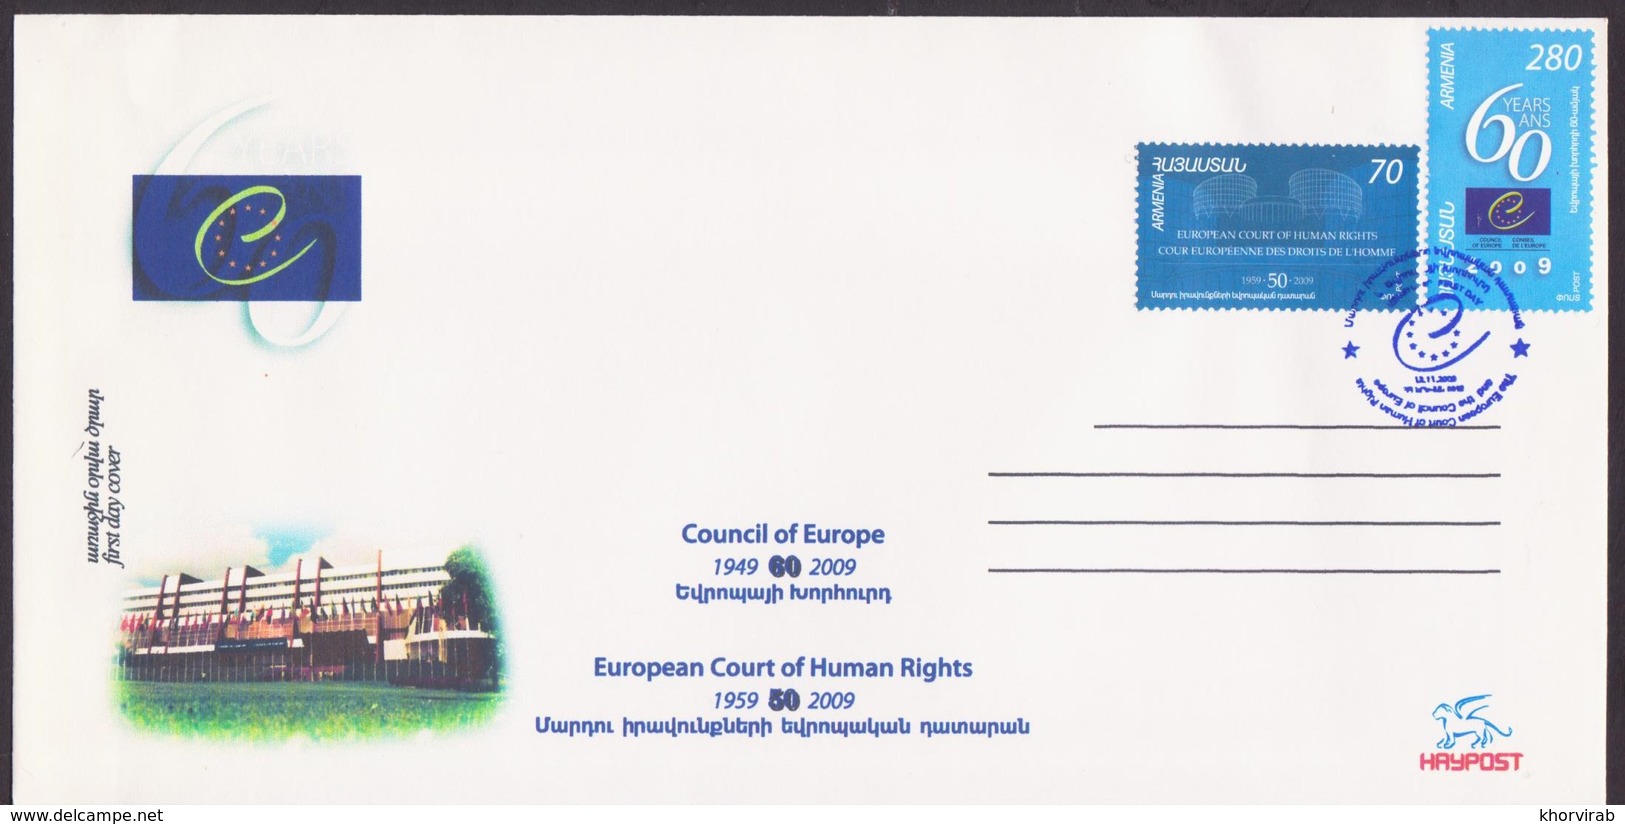 ARMENIA COUNCIL OF EUROPE COURT OF HUMAN RIGHTS 2009 FDC - Armenia